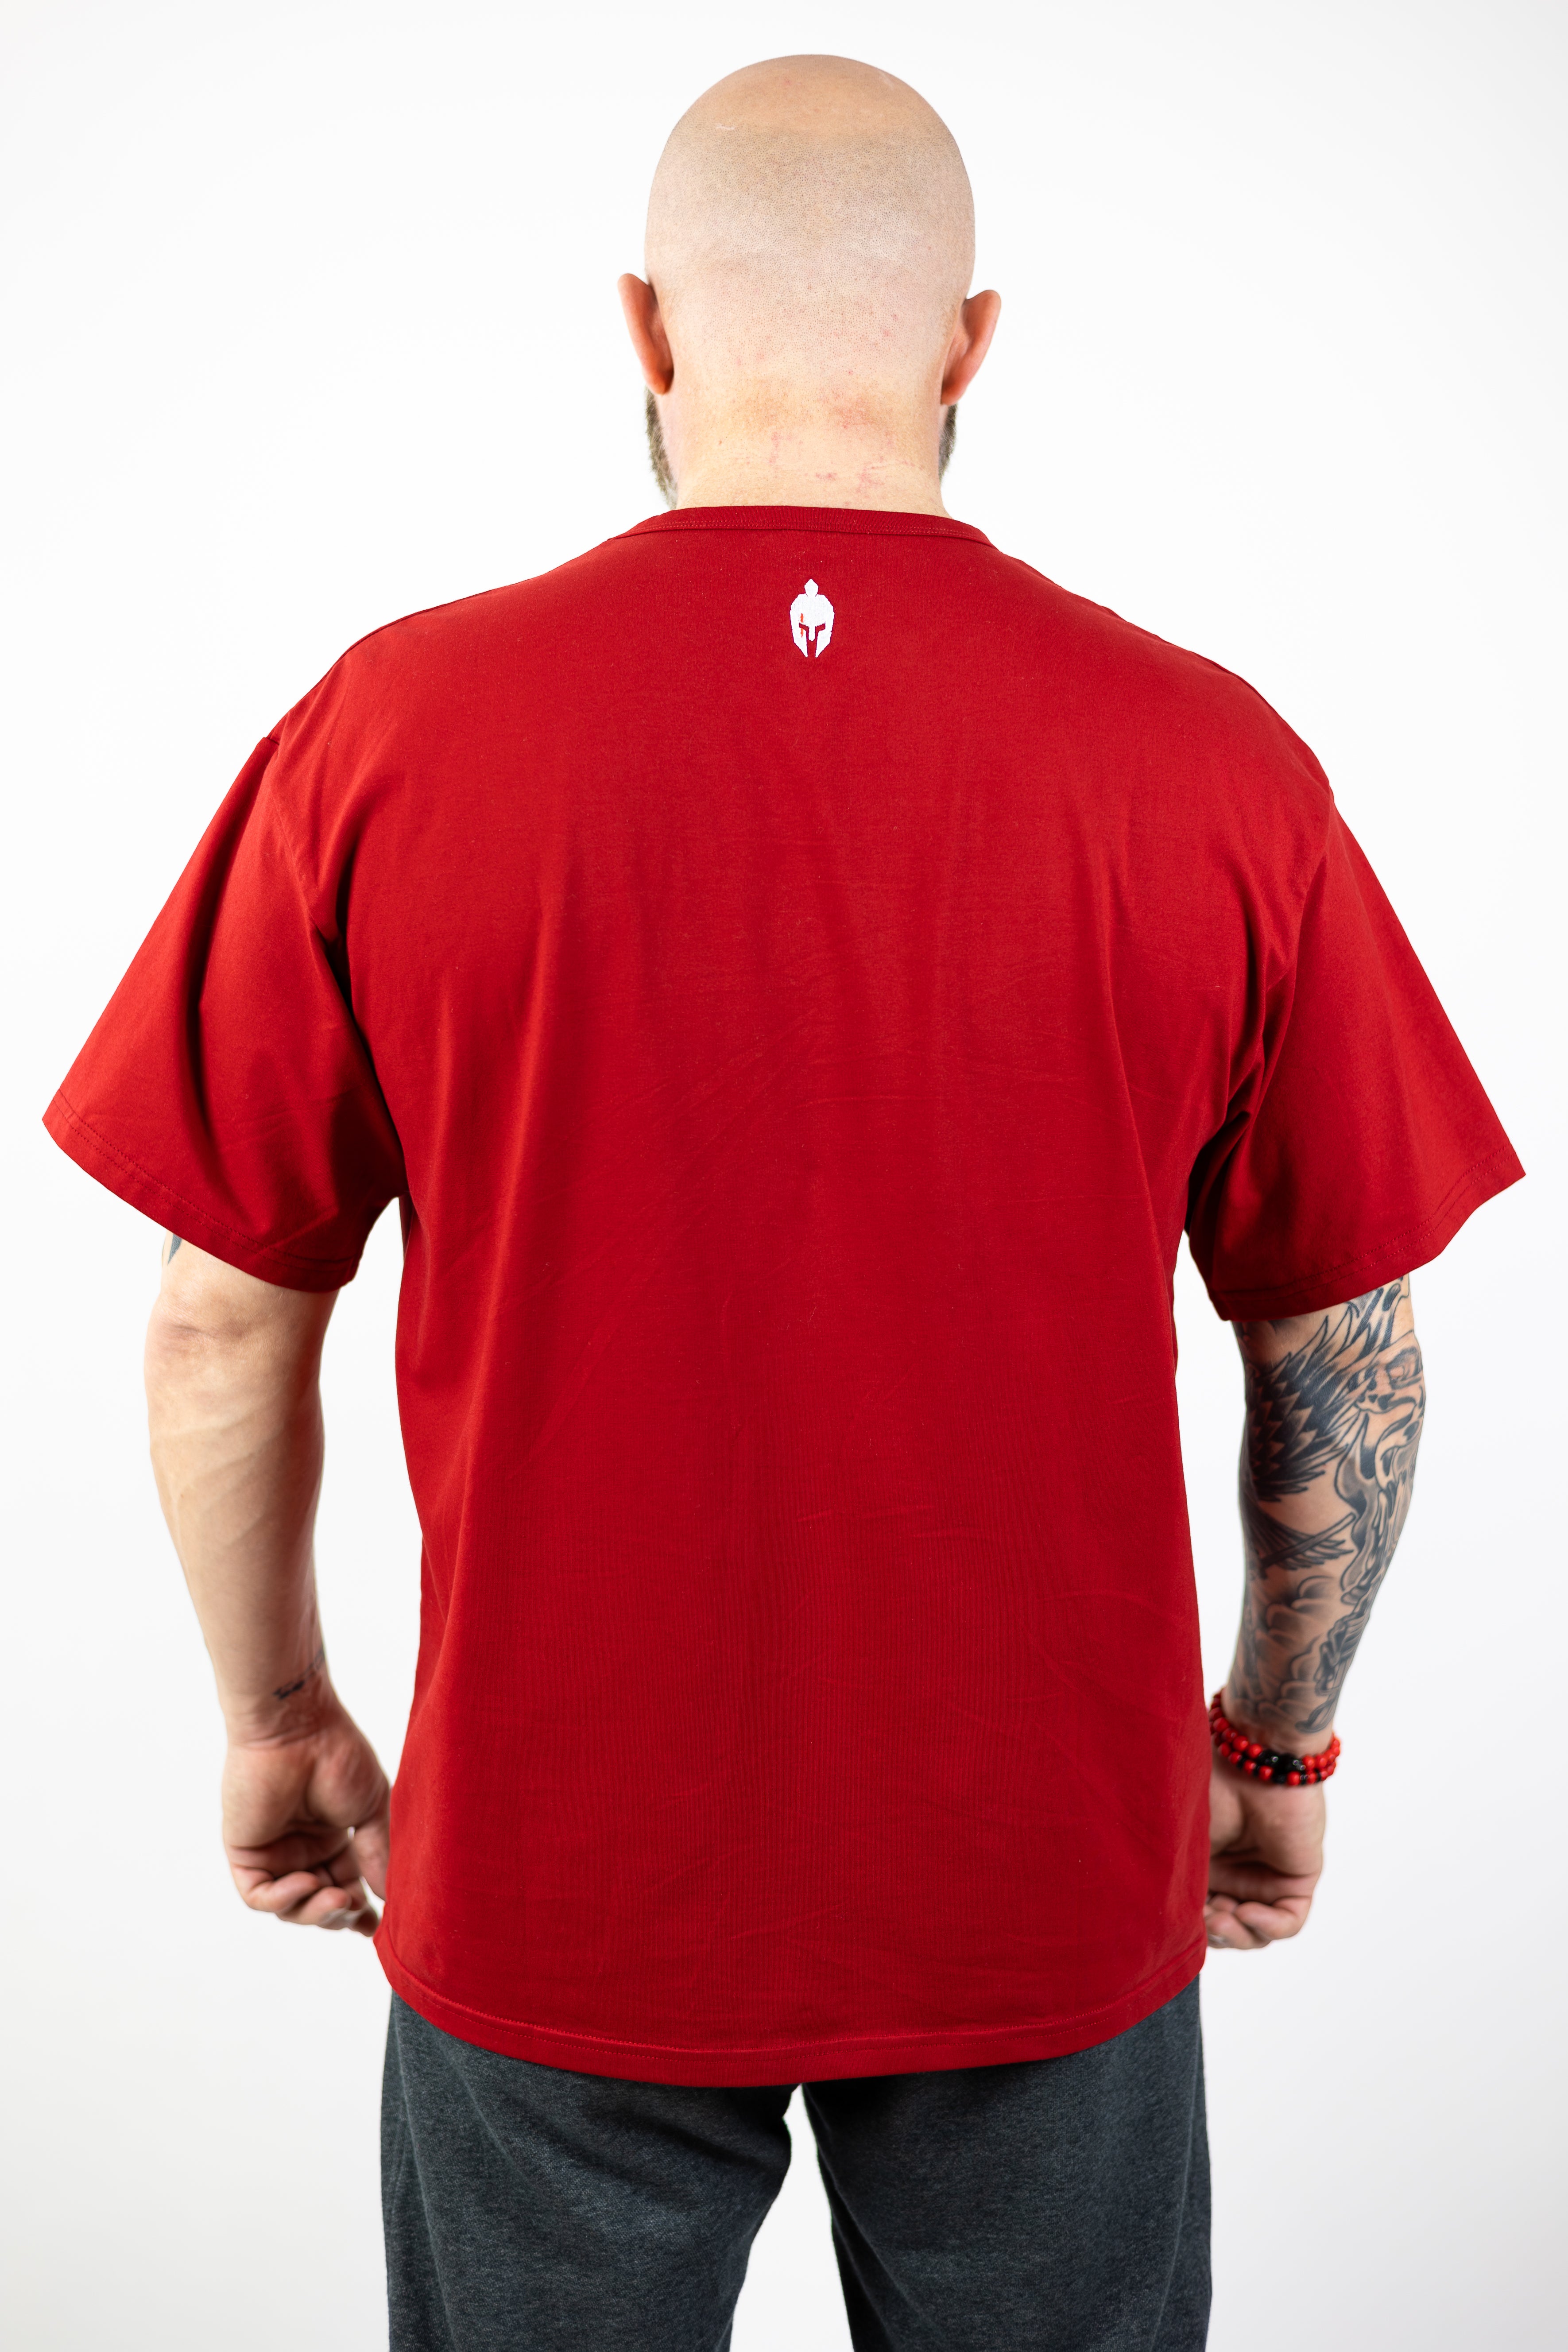 man modeling red Strength of One workout shirt with an embroidered helmet logo at back neck